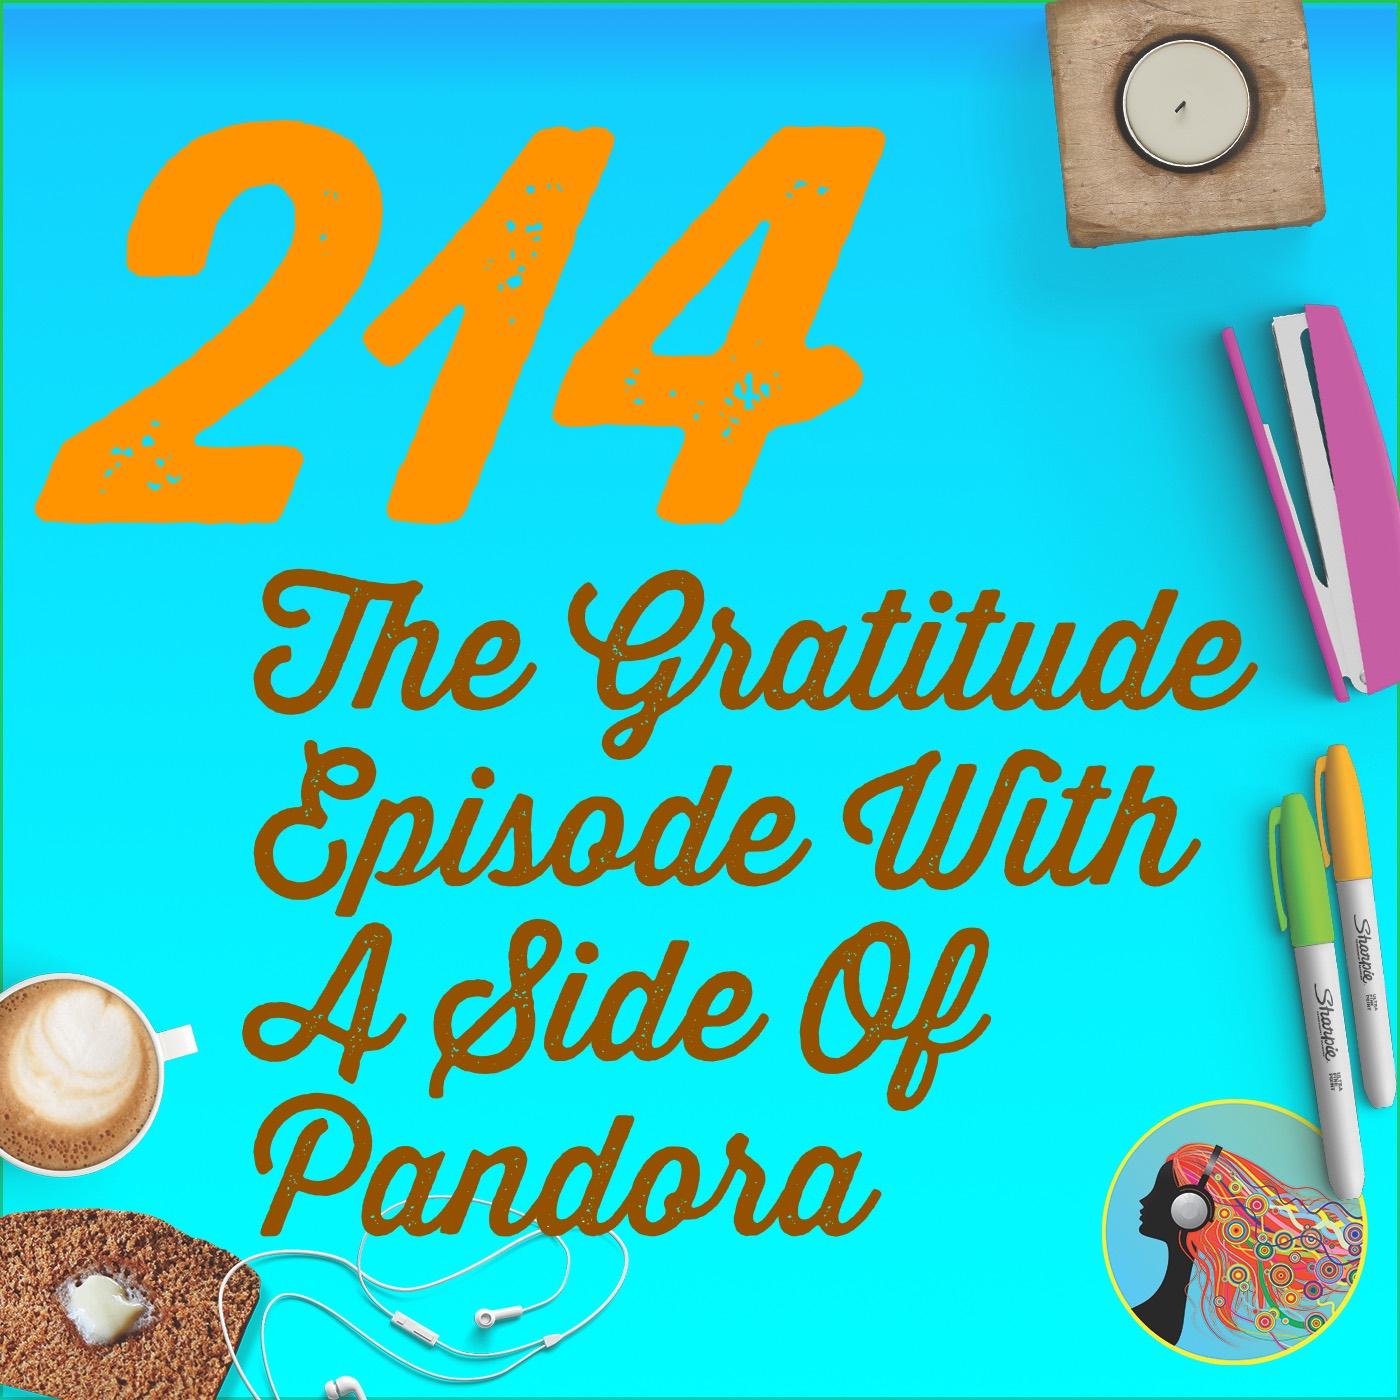 214 The Gratitude Episode With A Side Of Pandora